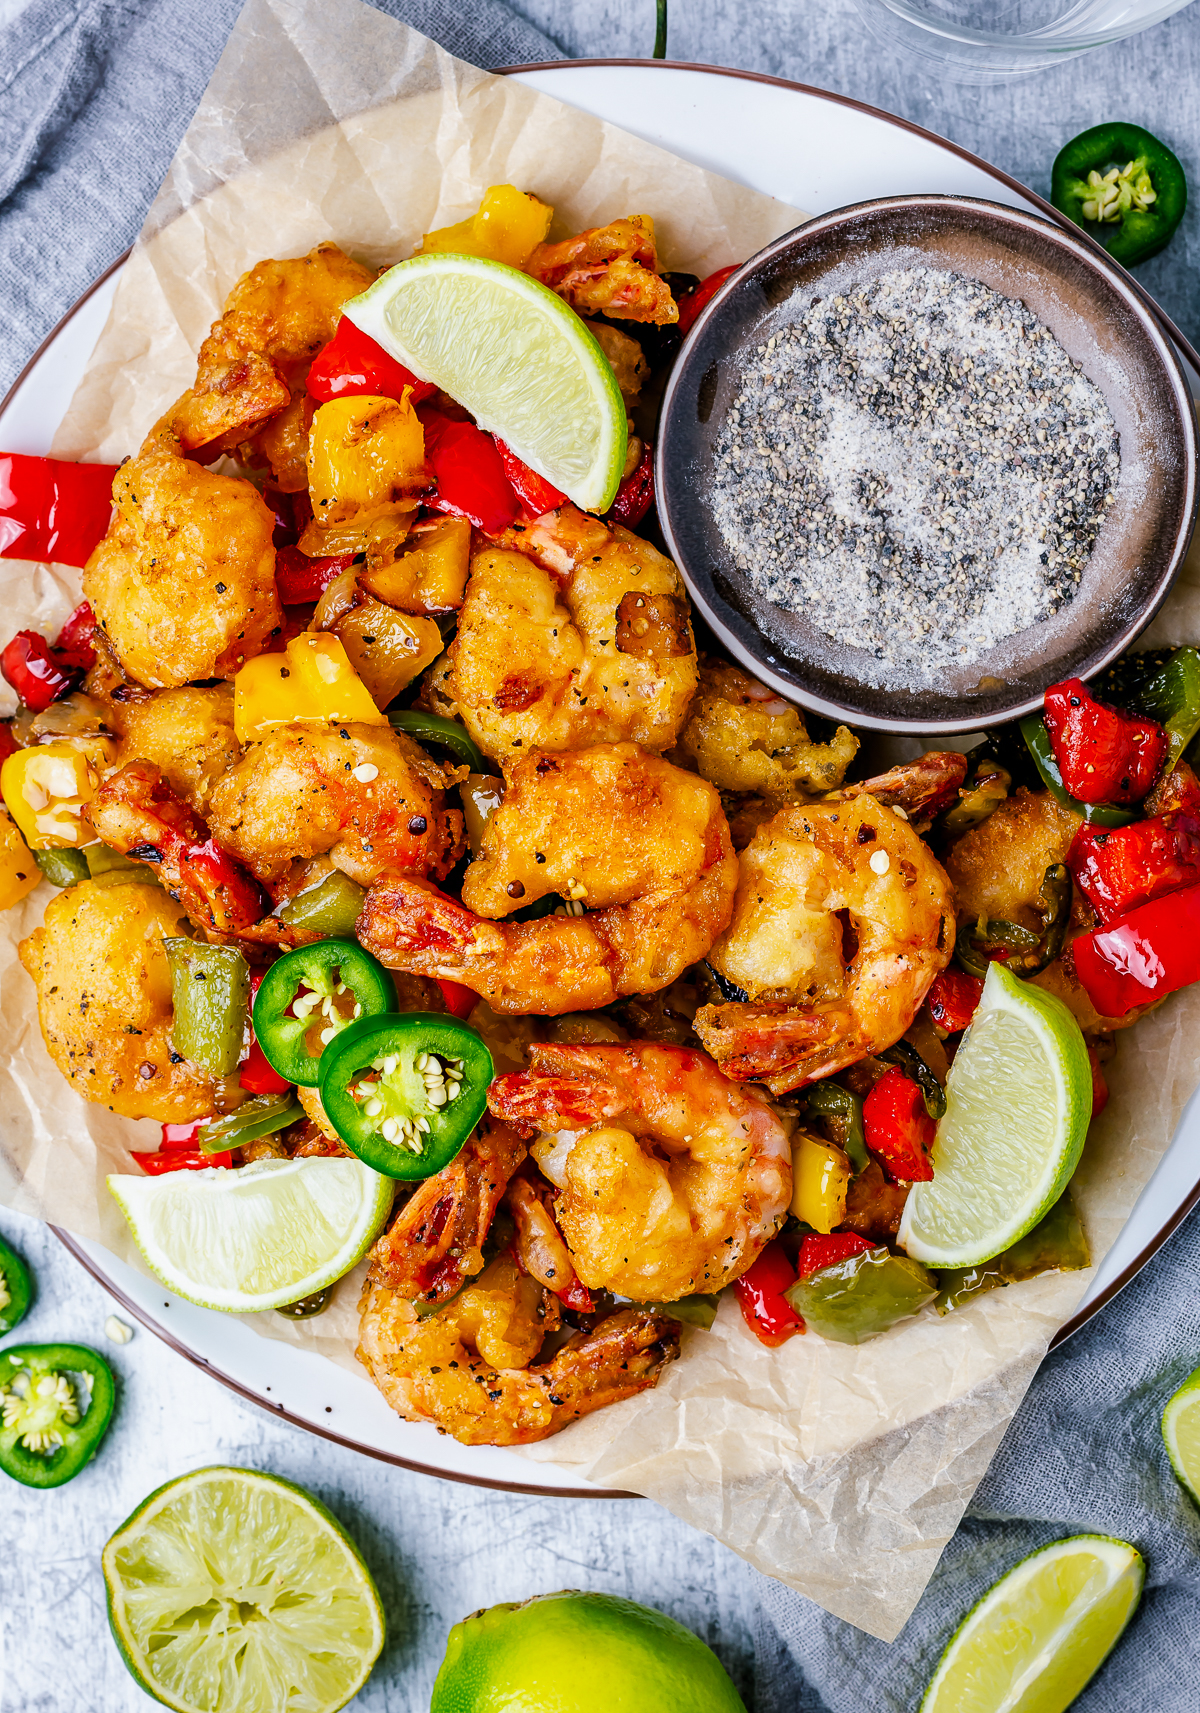 Overhead of finished Salt and Pepper Shrimp on plate with limes and a bowl of salt and pepper.